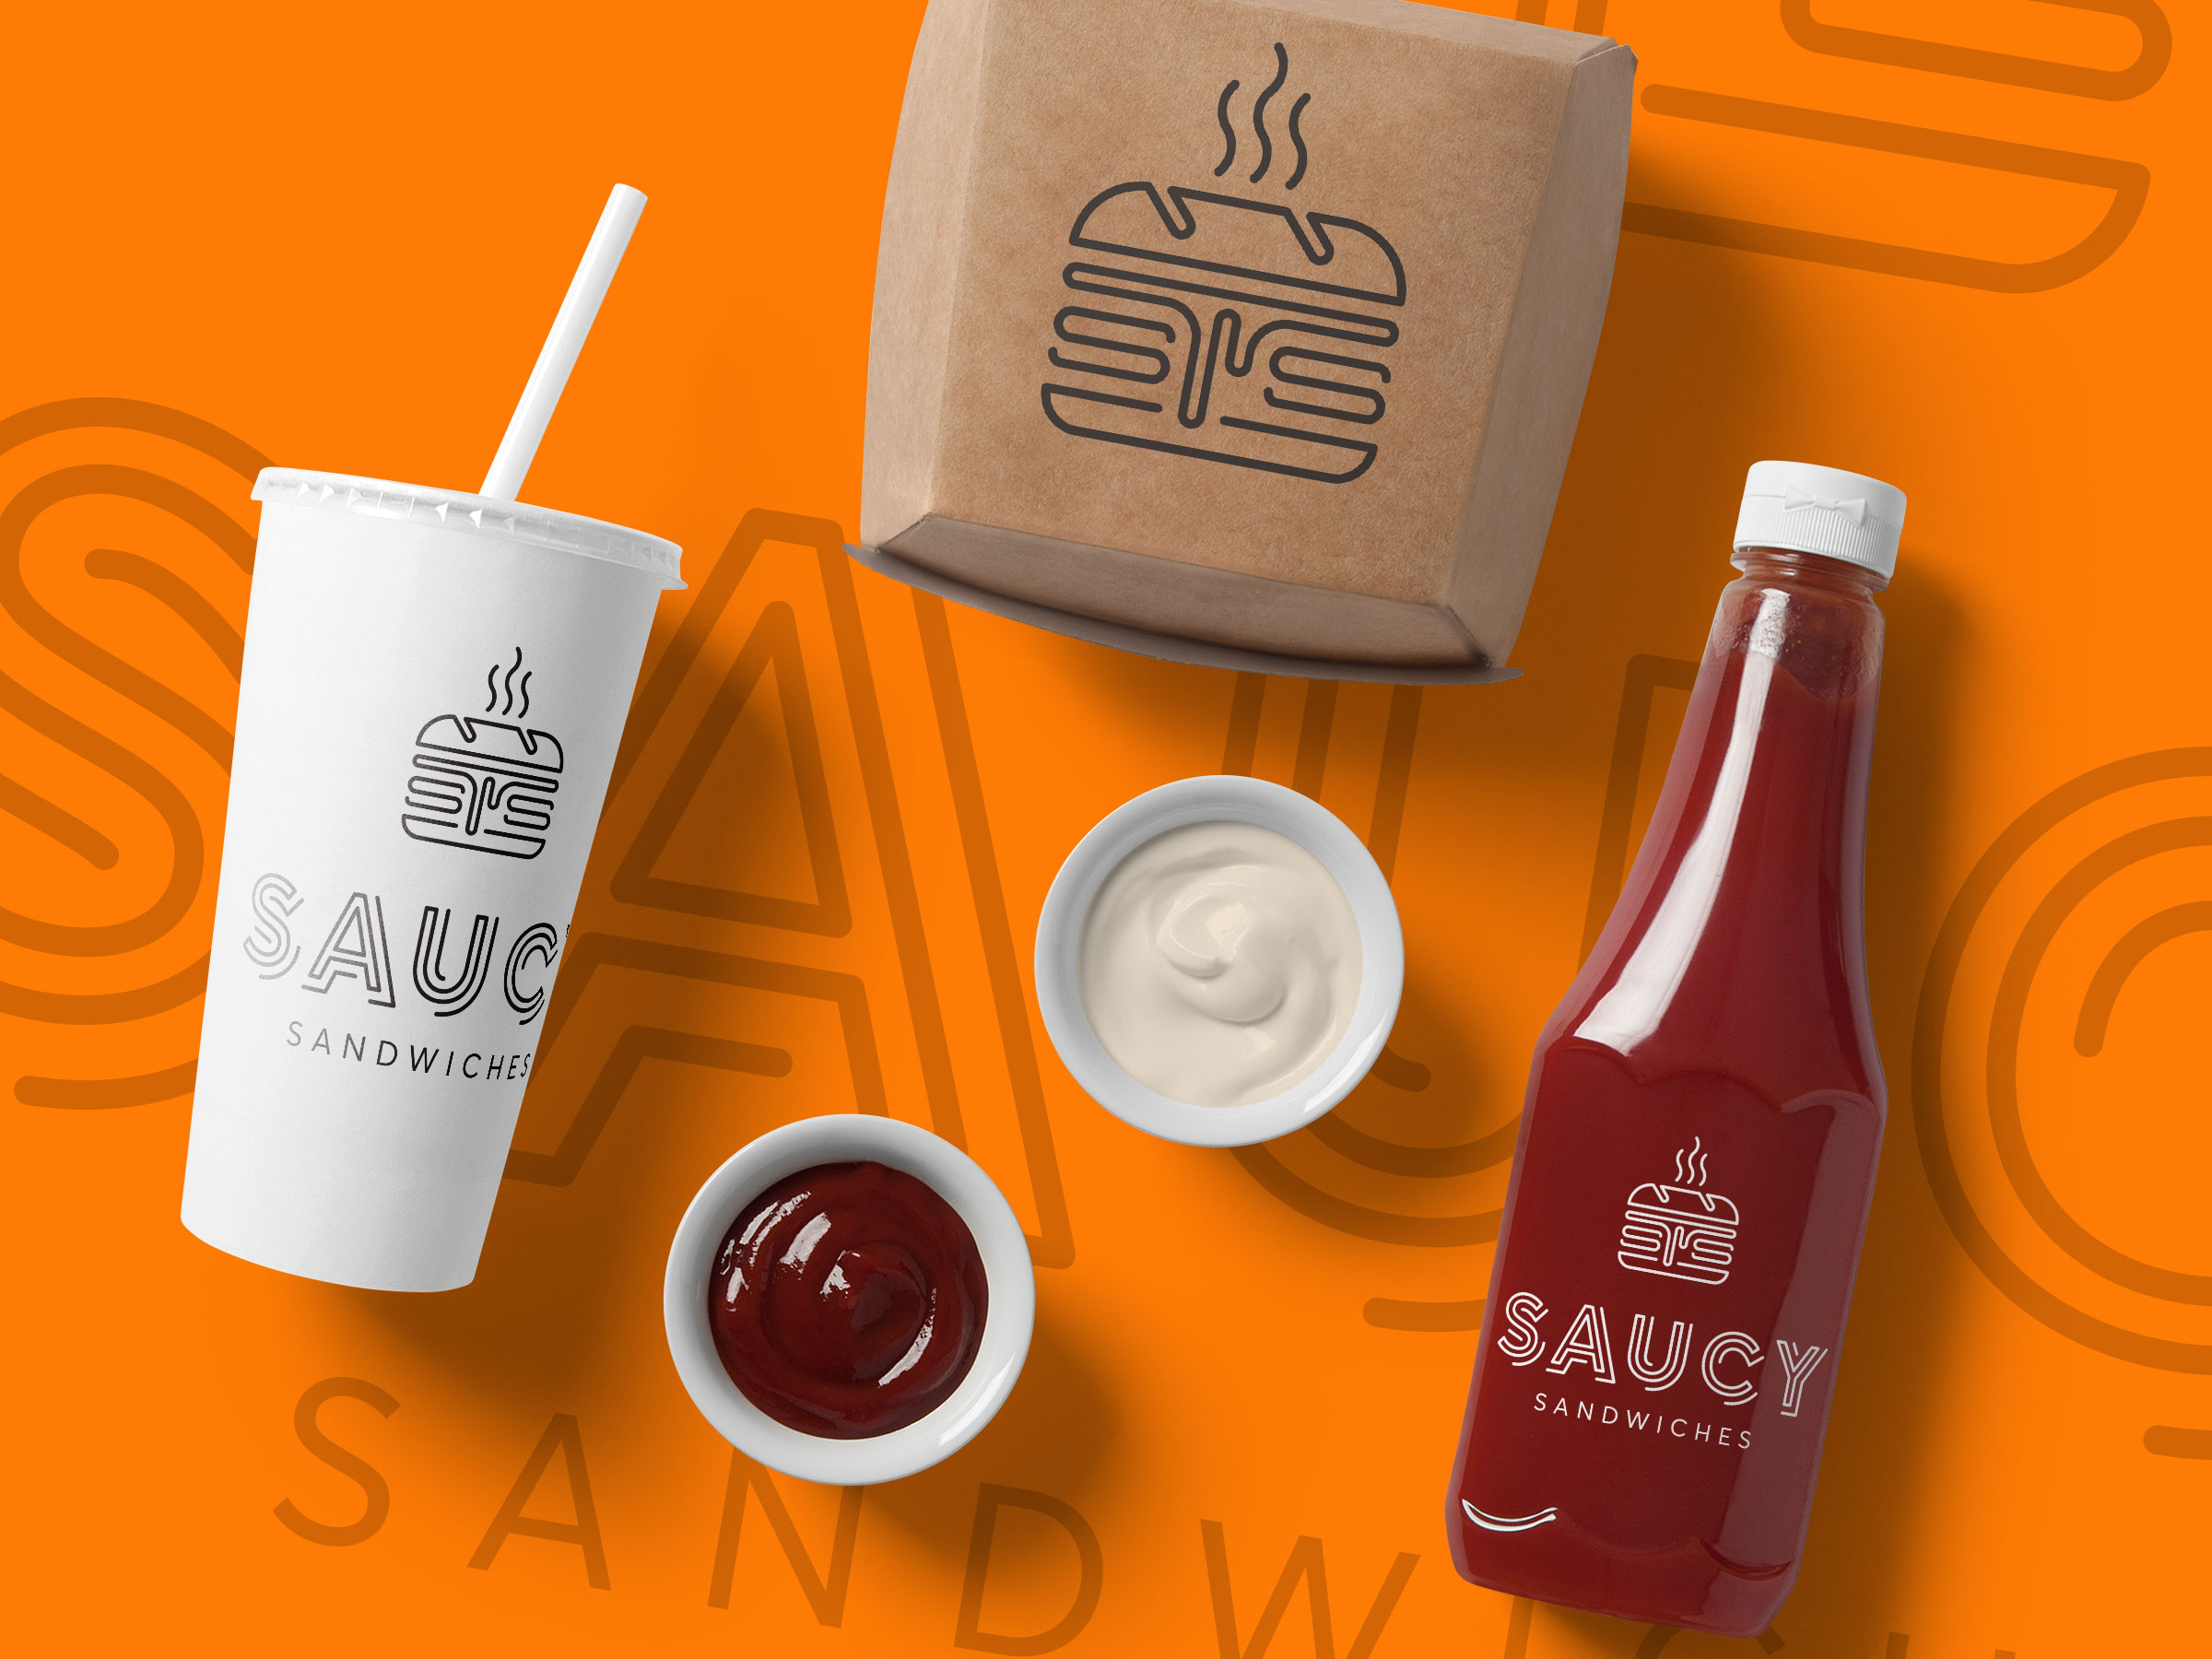 Dribbble - packaging_mockups_saucy.jpg by Chris Mallinson